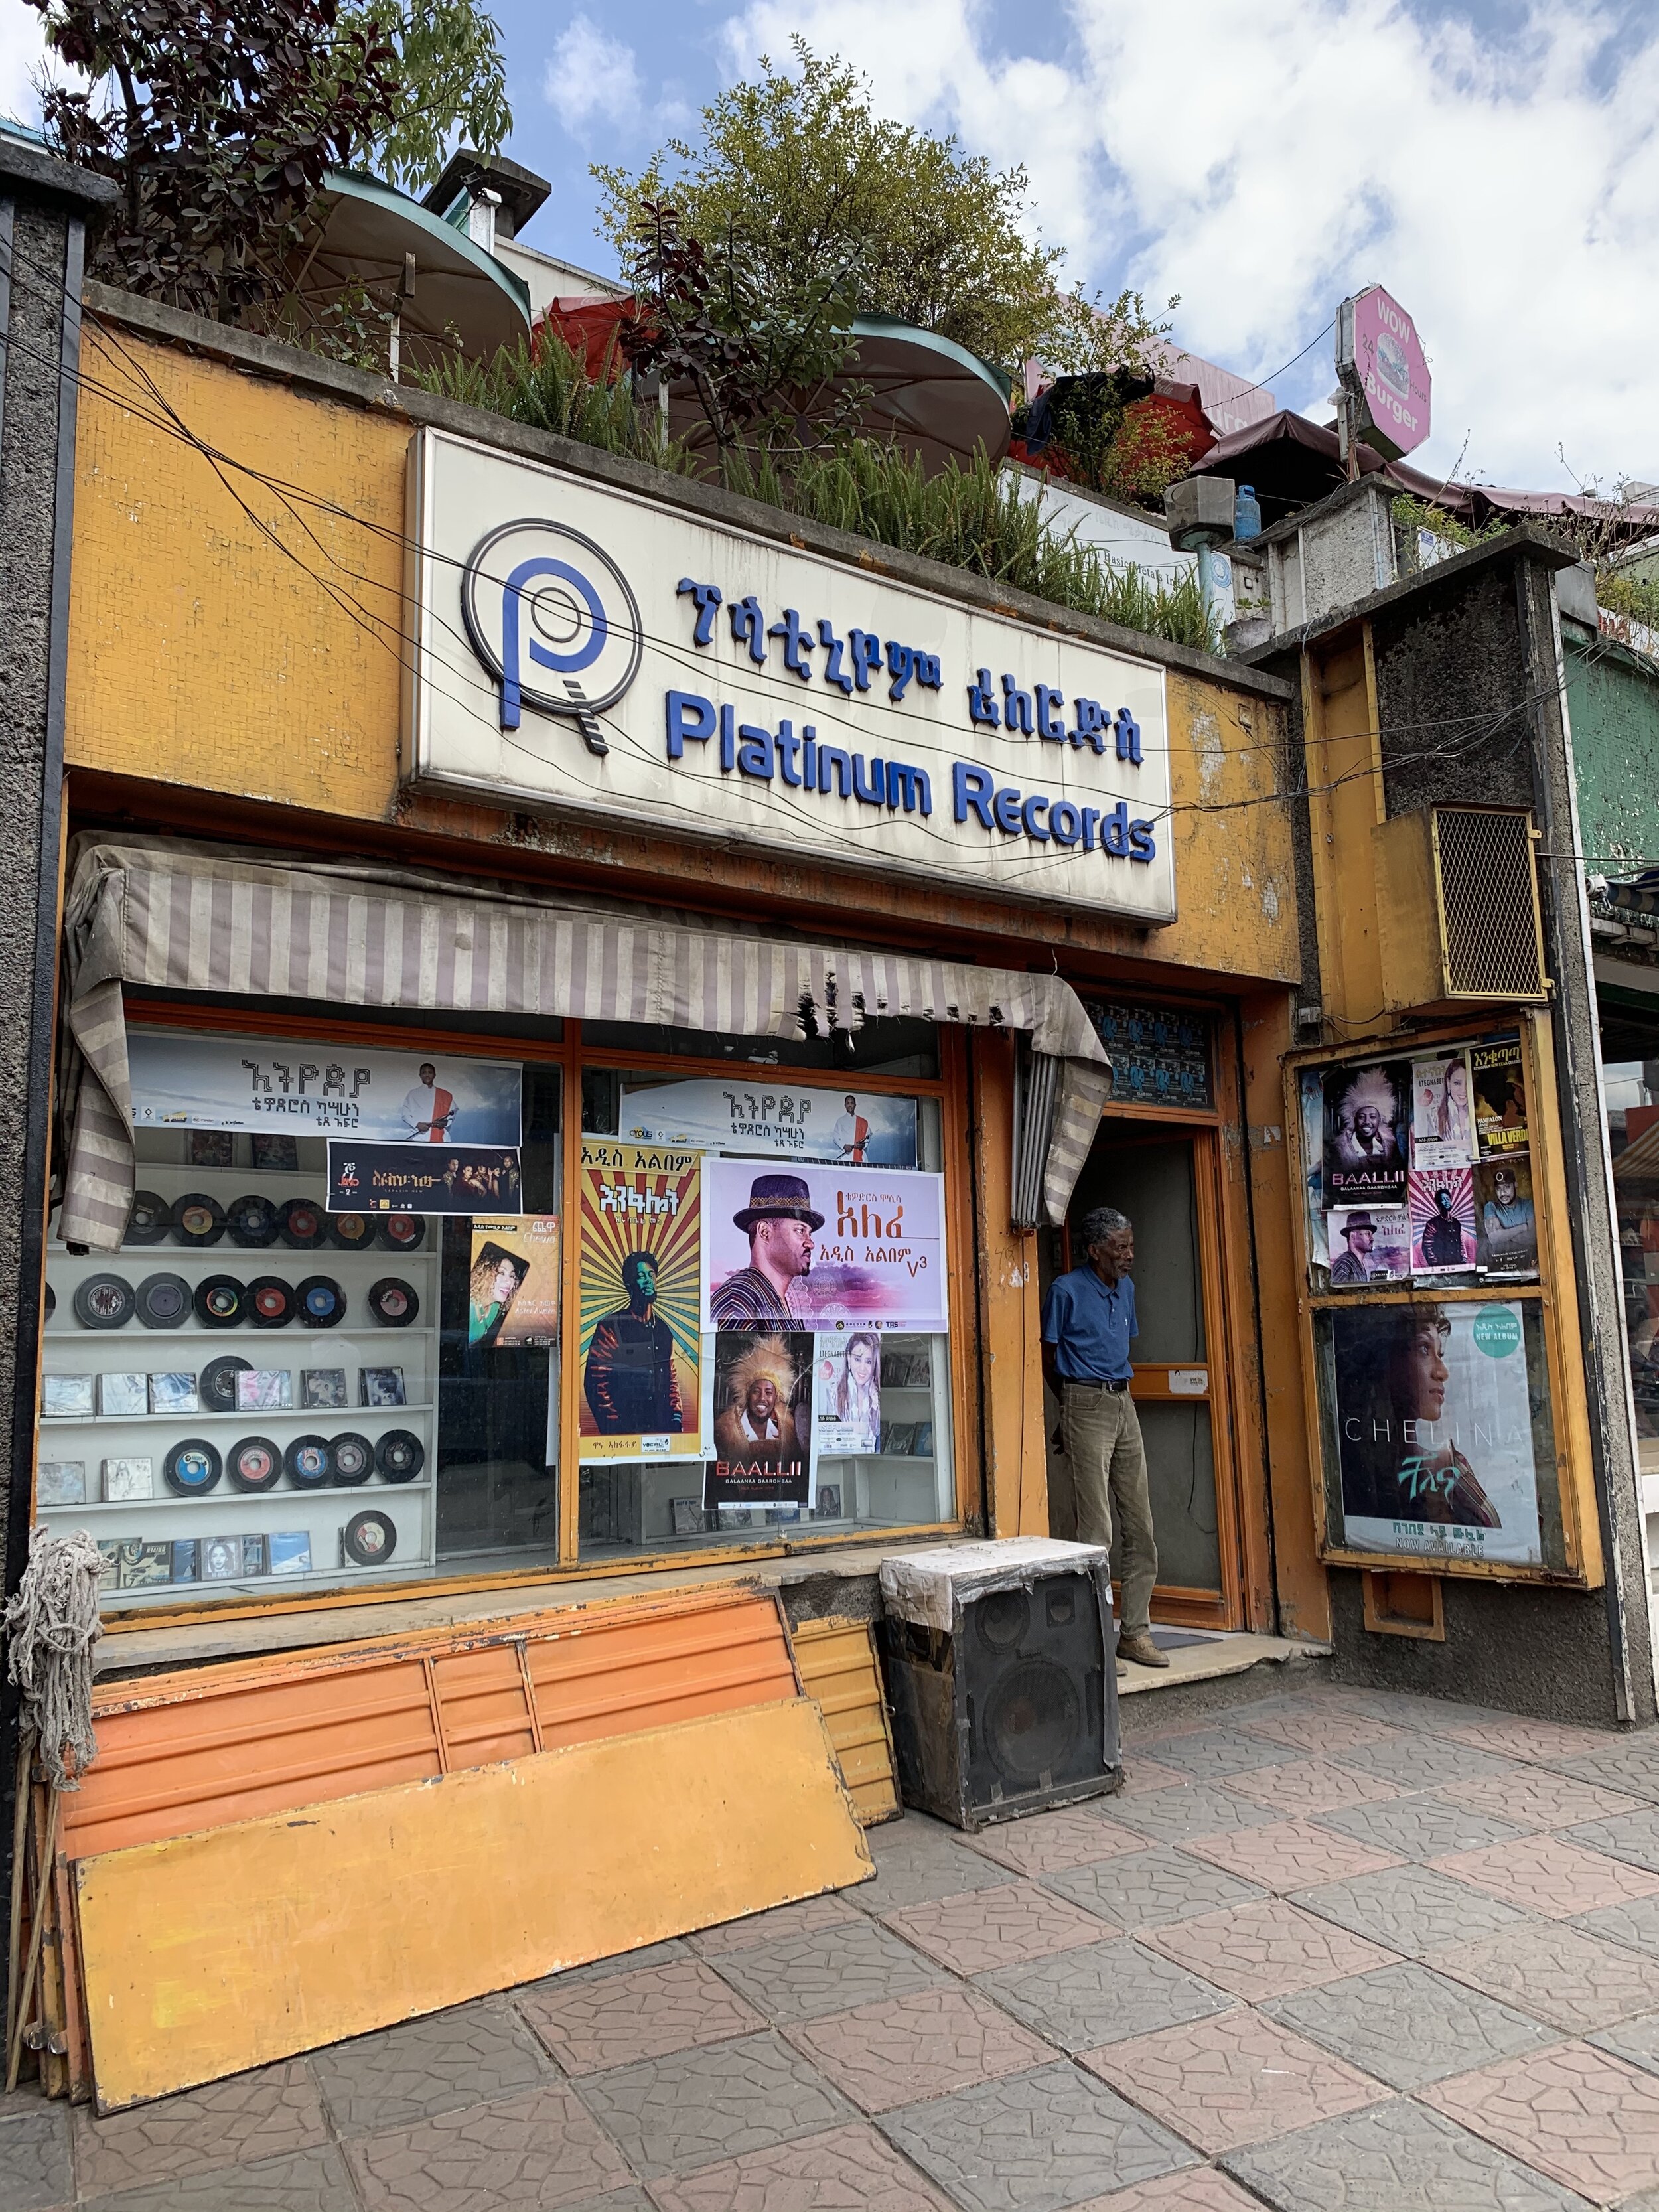 A music store in the Piassa neighborhood. Vinyl is universally appealing to many (myself included).